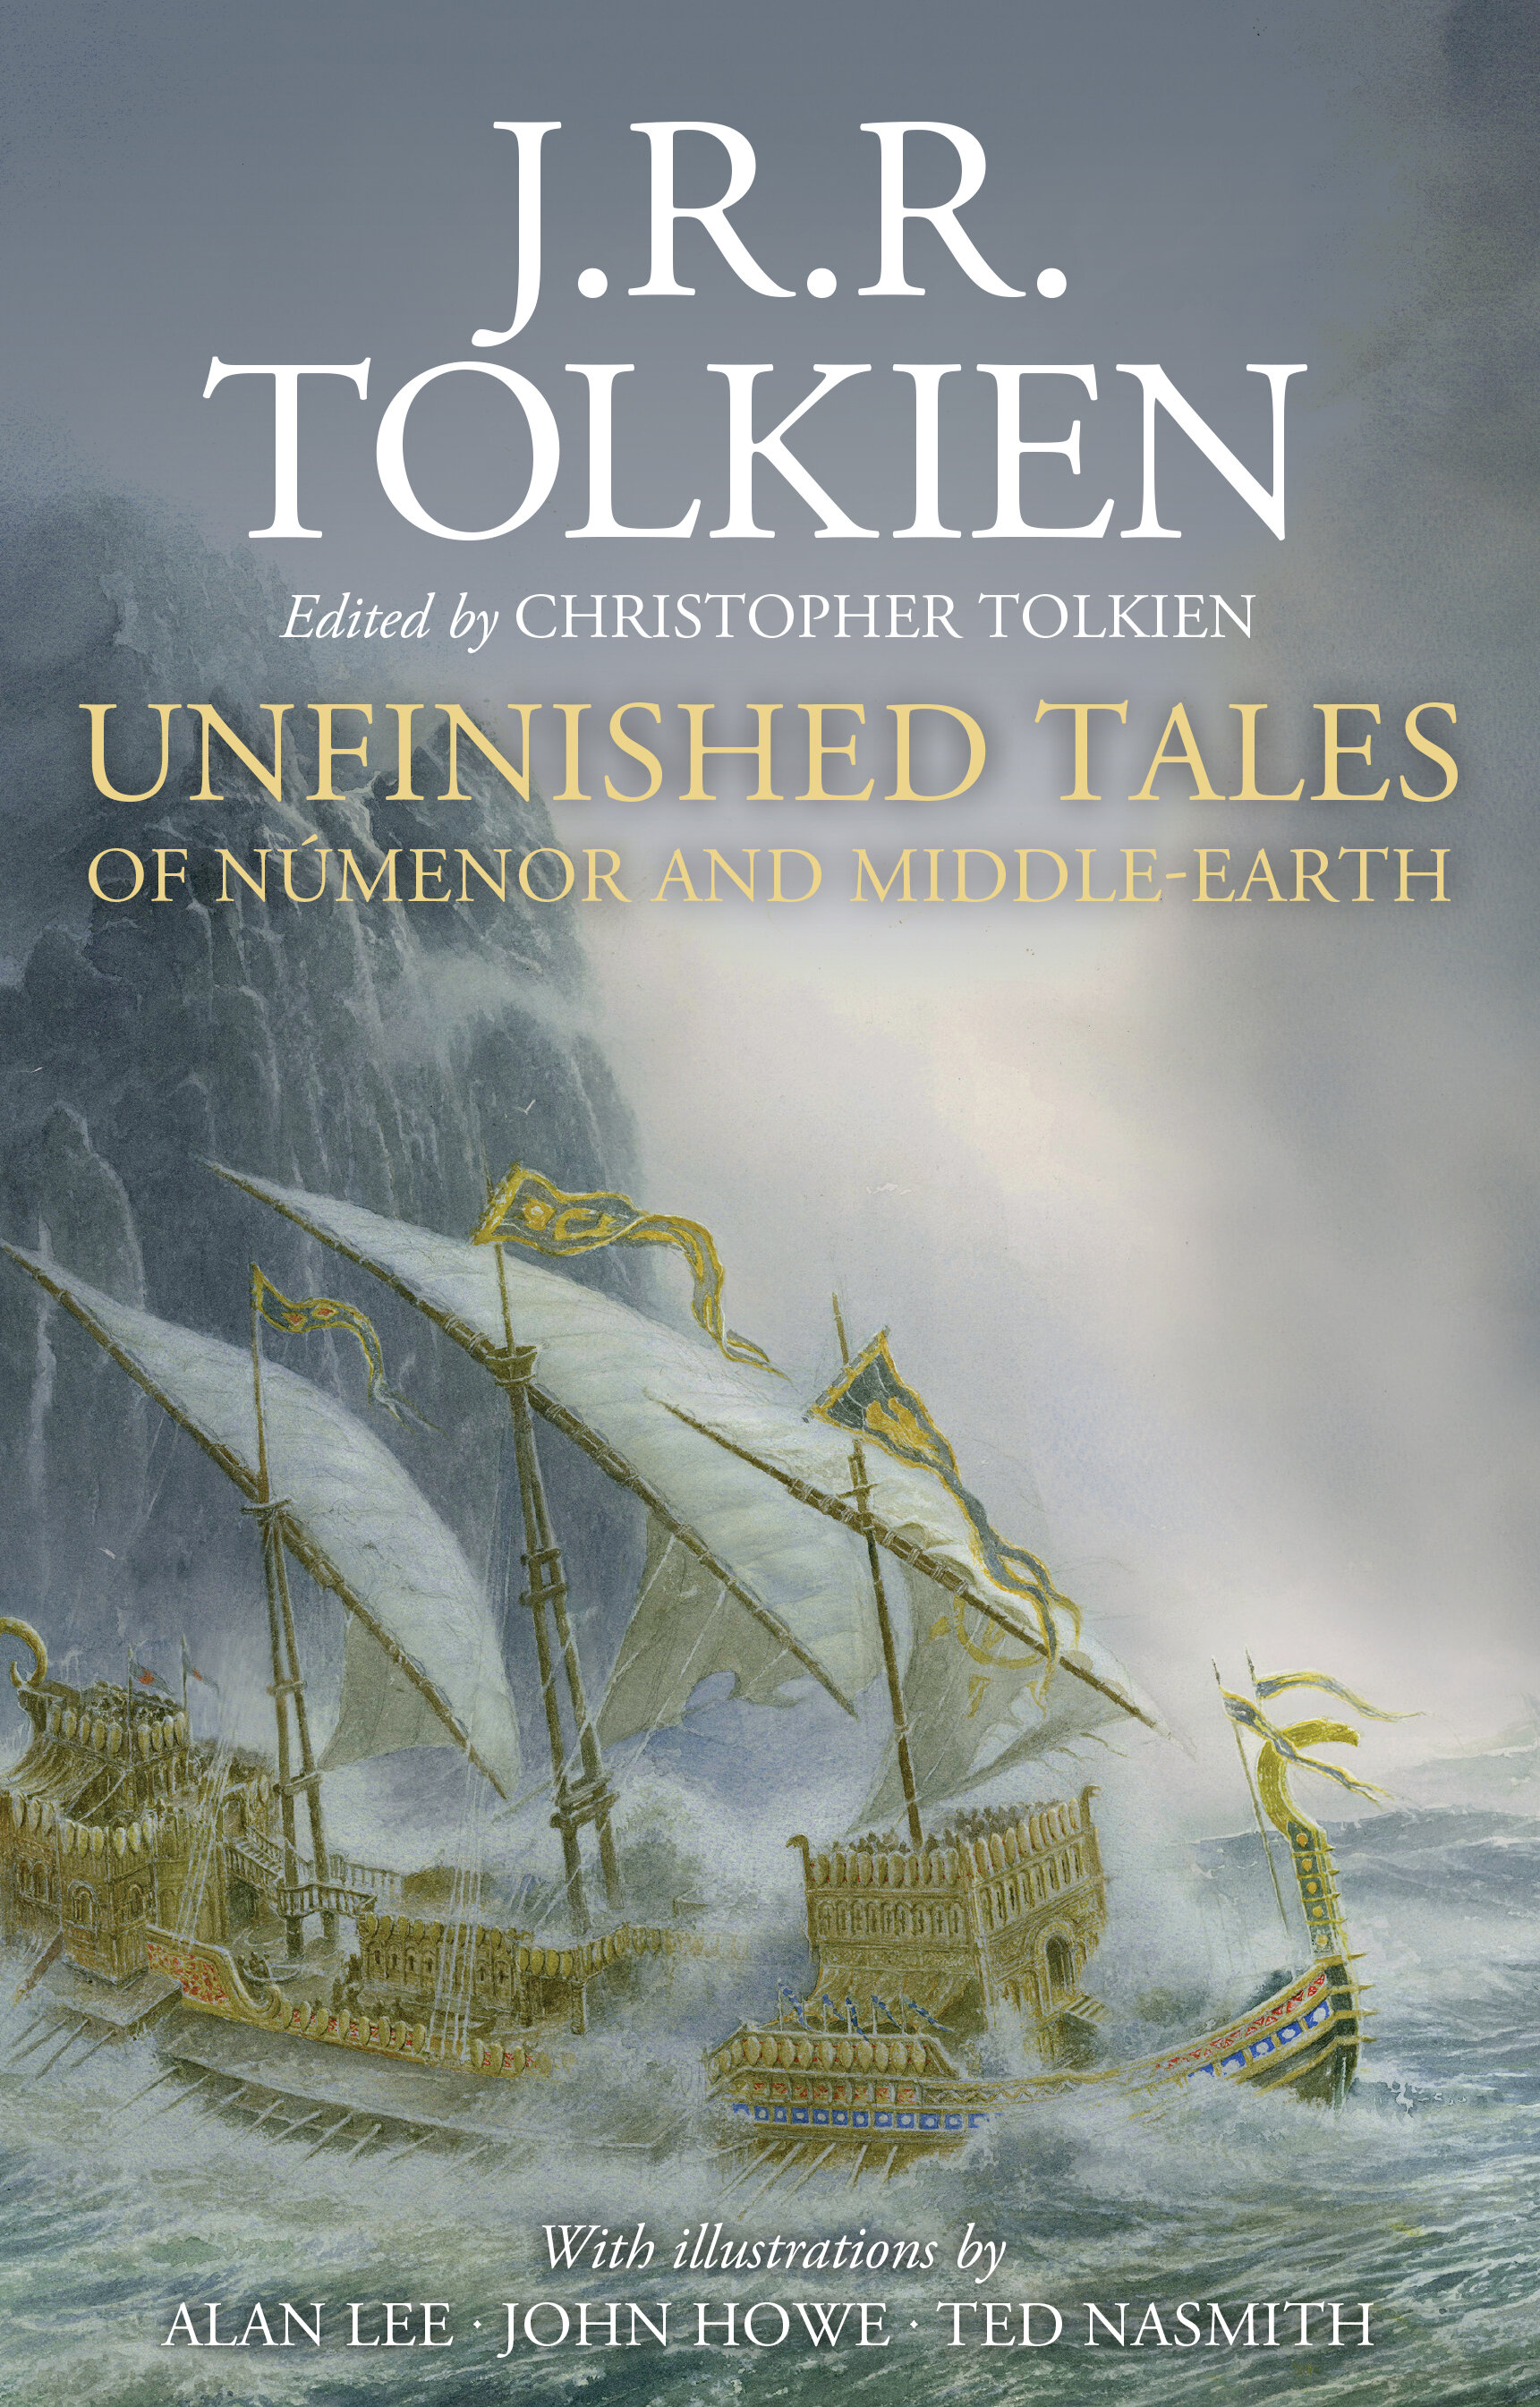 Best of Reprints Unfinished Tales Illustrated Edition by JRR Tolkien (Houghton Mifflin).jpg